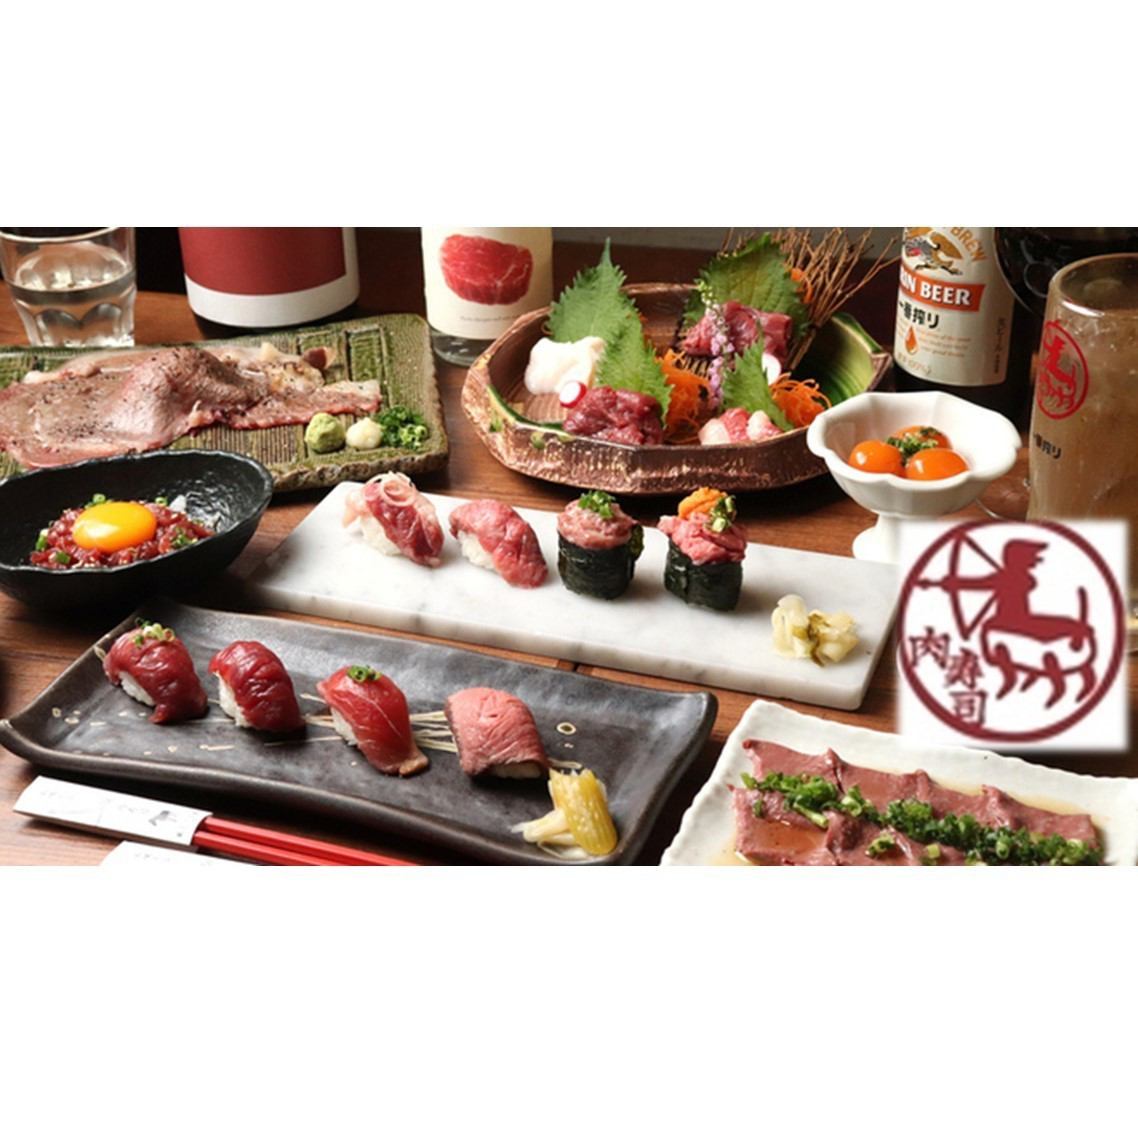 If you're having a girls' night out in Shinjuku 3-chome, be sure to try meat sushi! We have a wide variety of cocktails★